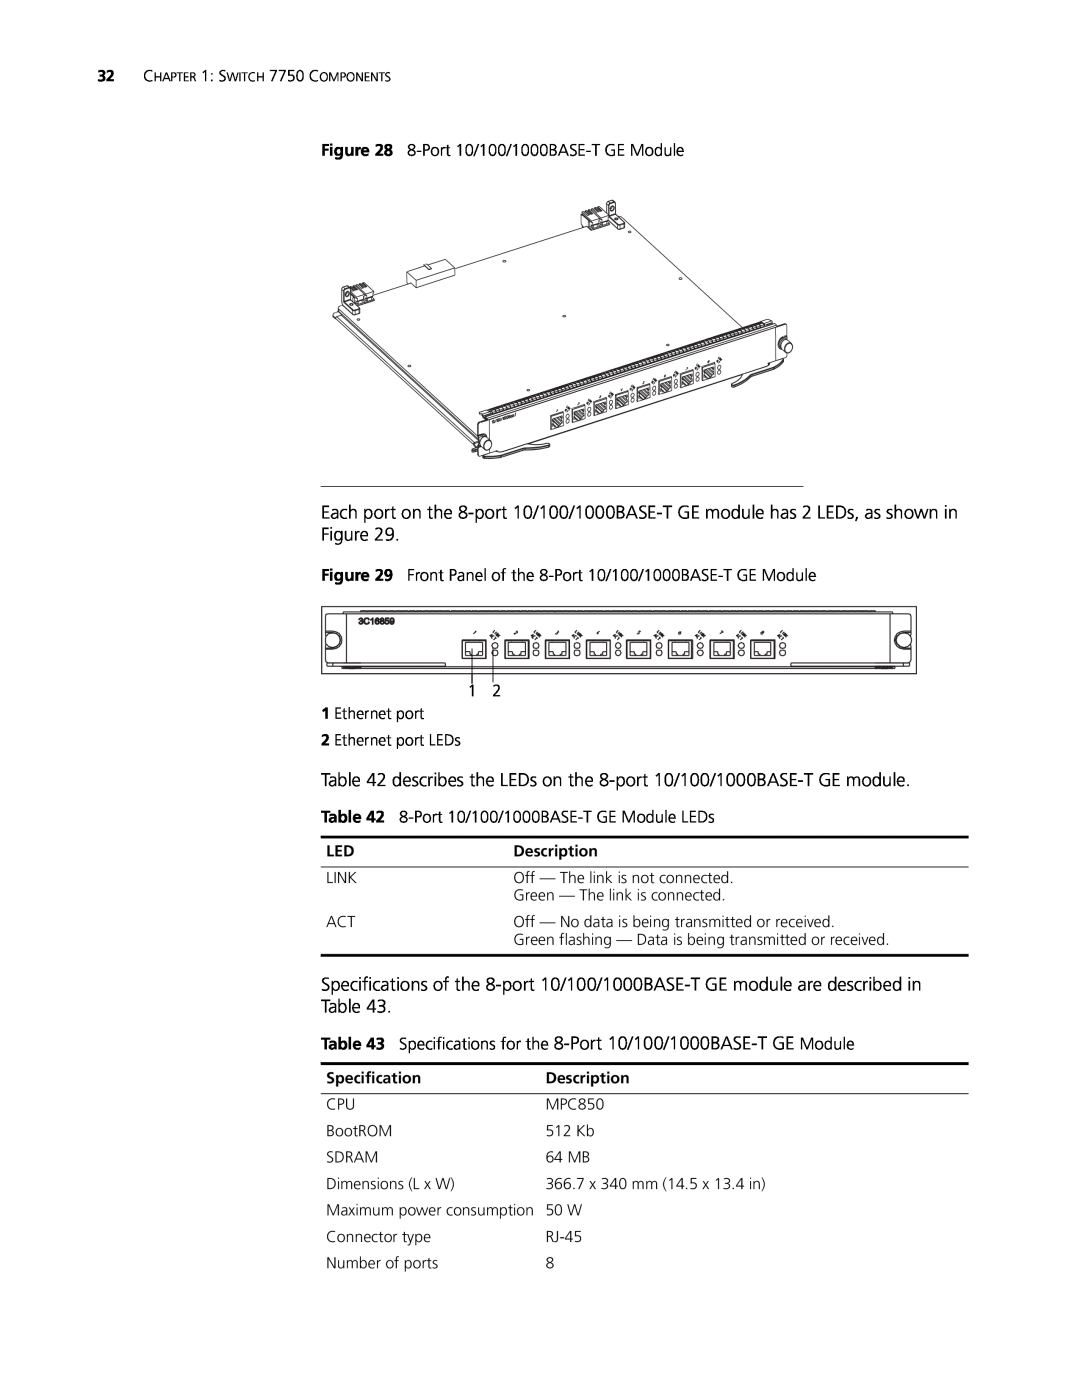 3Com 3C16895 7-slot Chassis, 3C16894 4-slot Chassis manual describes the LEDs on the 8-port 10/100/1000BASE-T GE module 